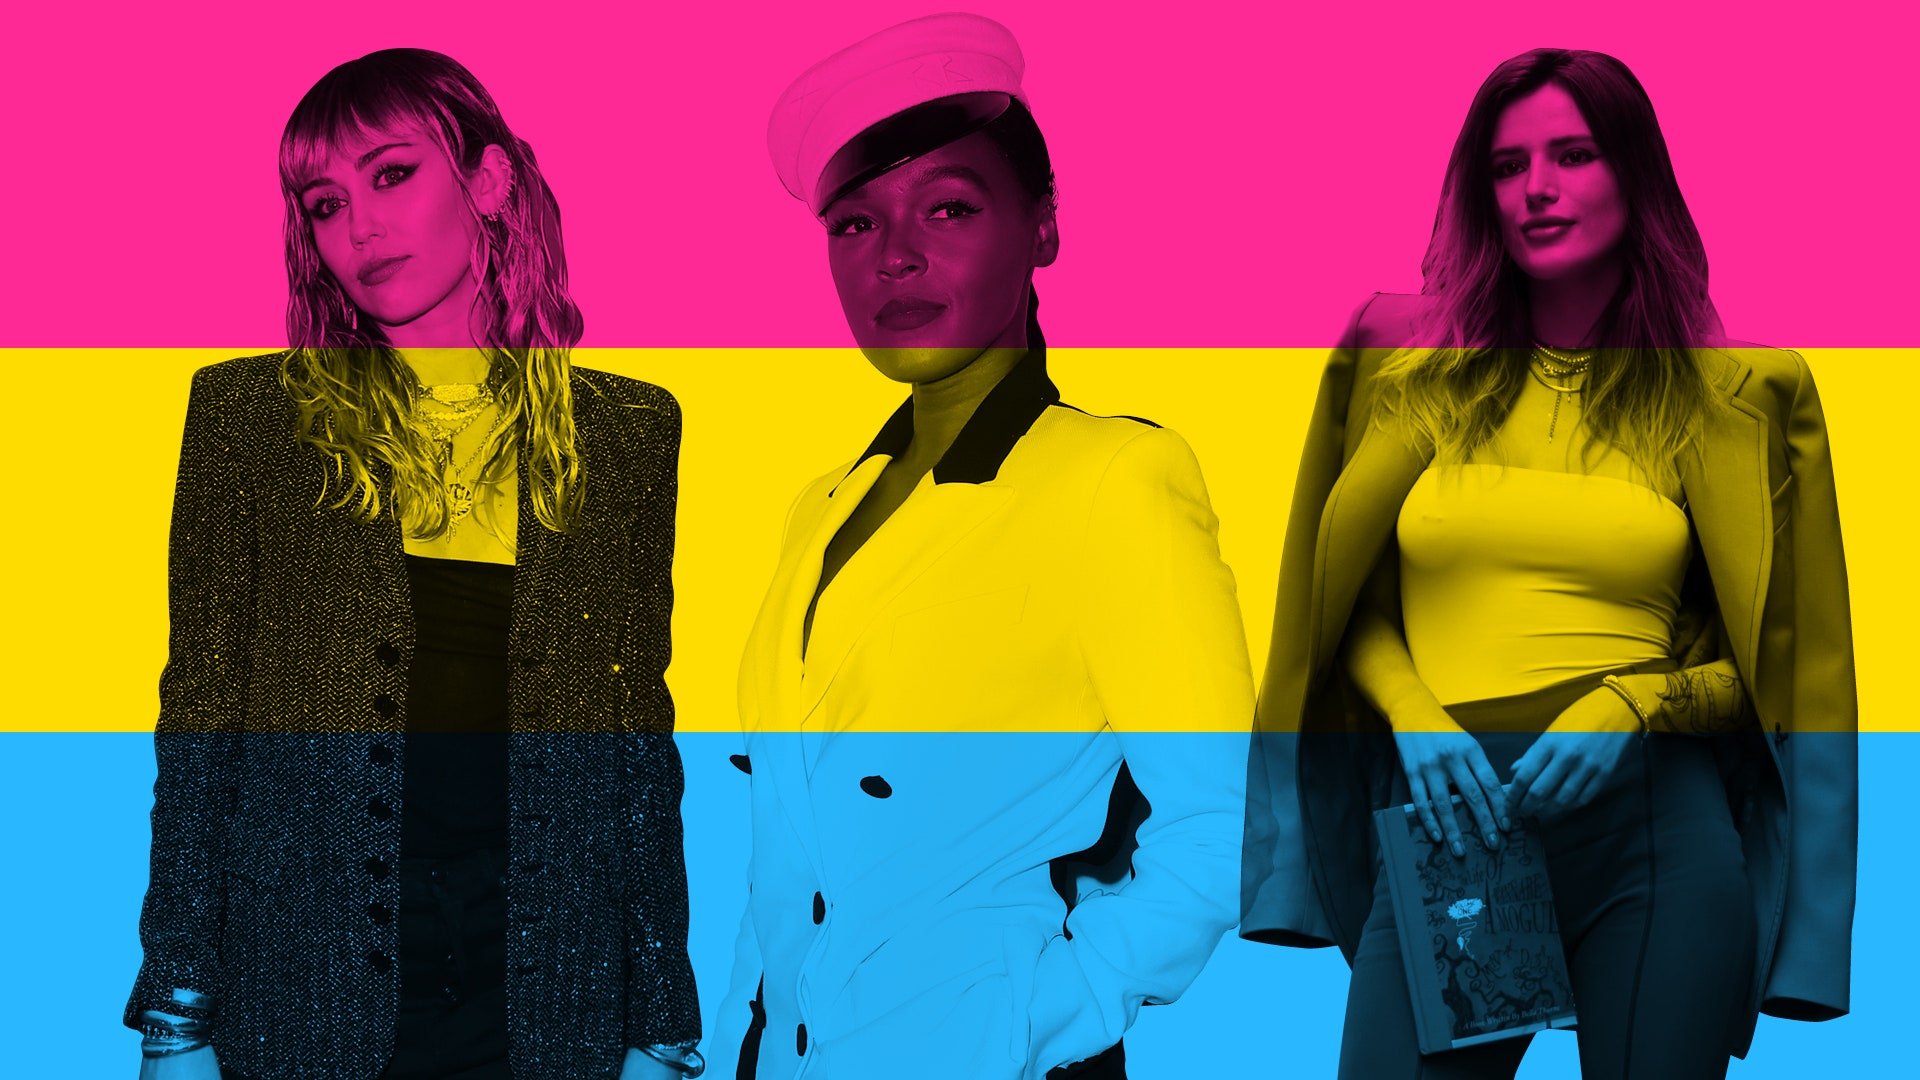 Pansexuality: How Do I Know If I'm Pansexual?